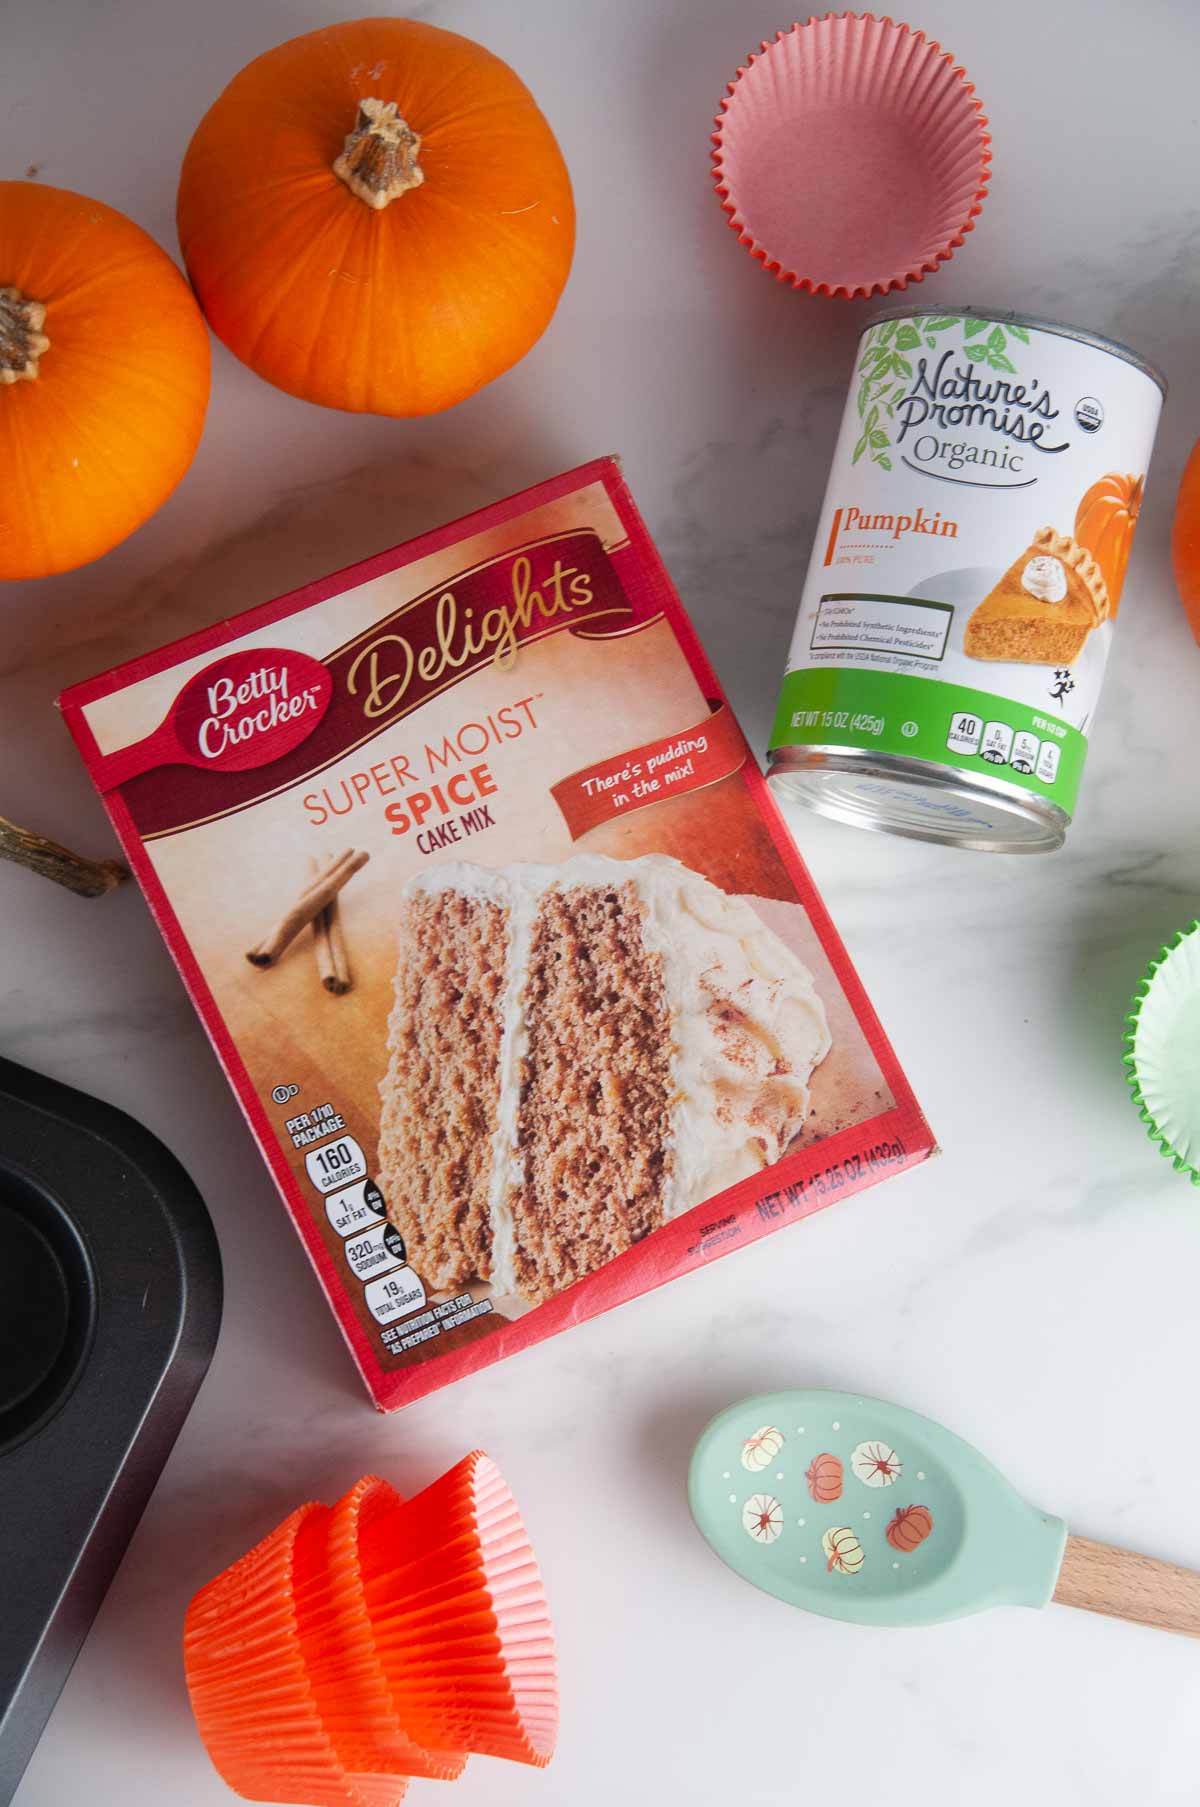 Ingredients for Pumpkin Muffins with Cake Mix: Pumpkin Puree and Cake Mix